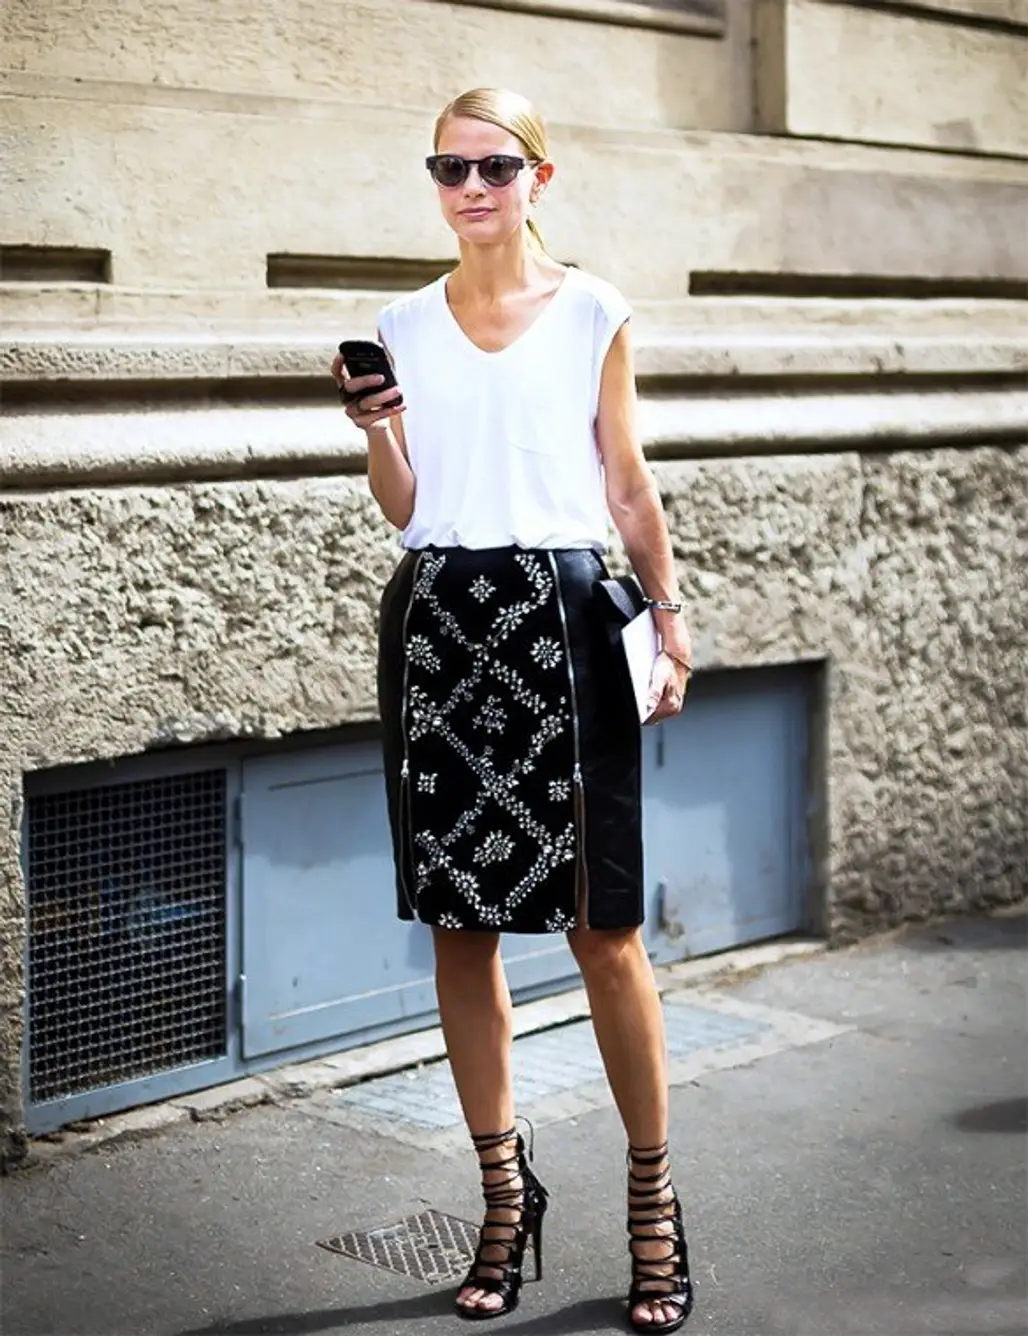 With an Embroidered Skirt